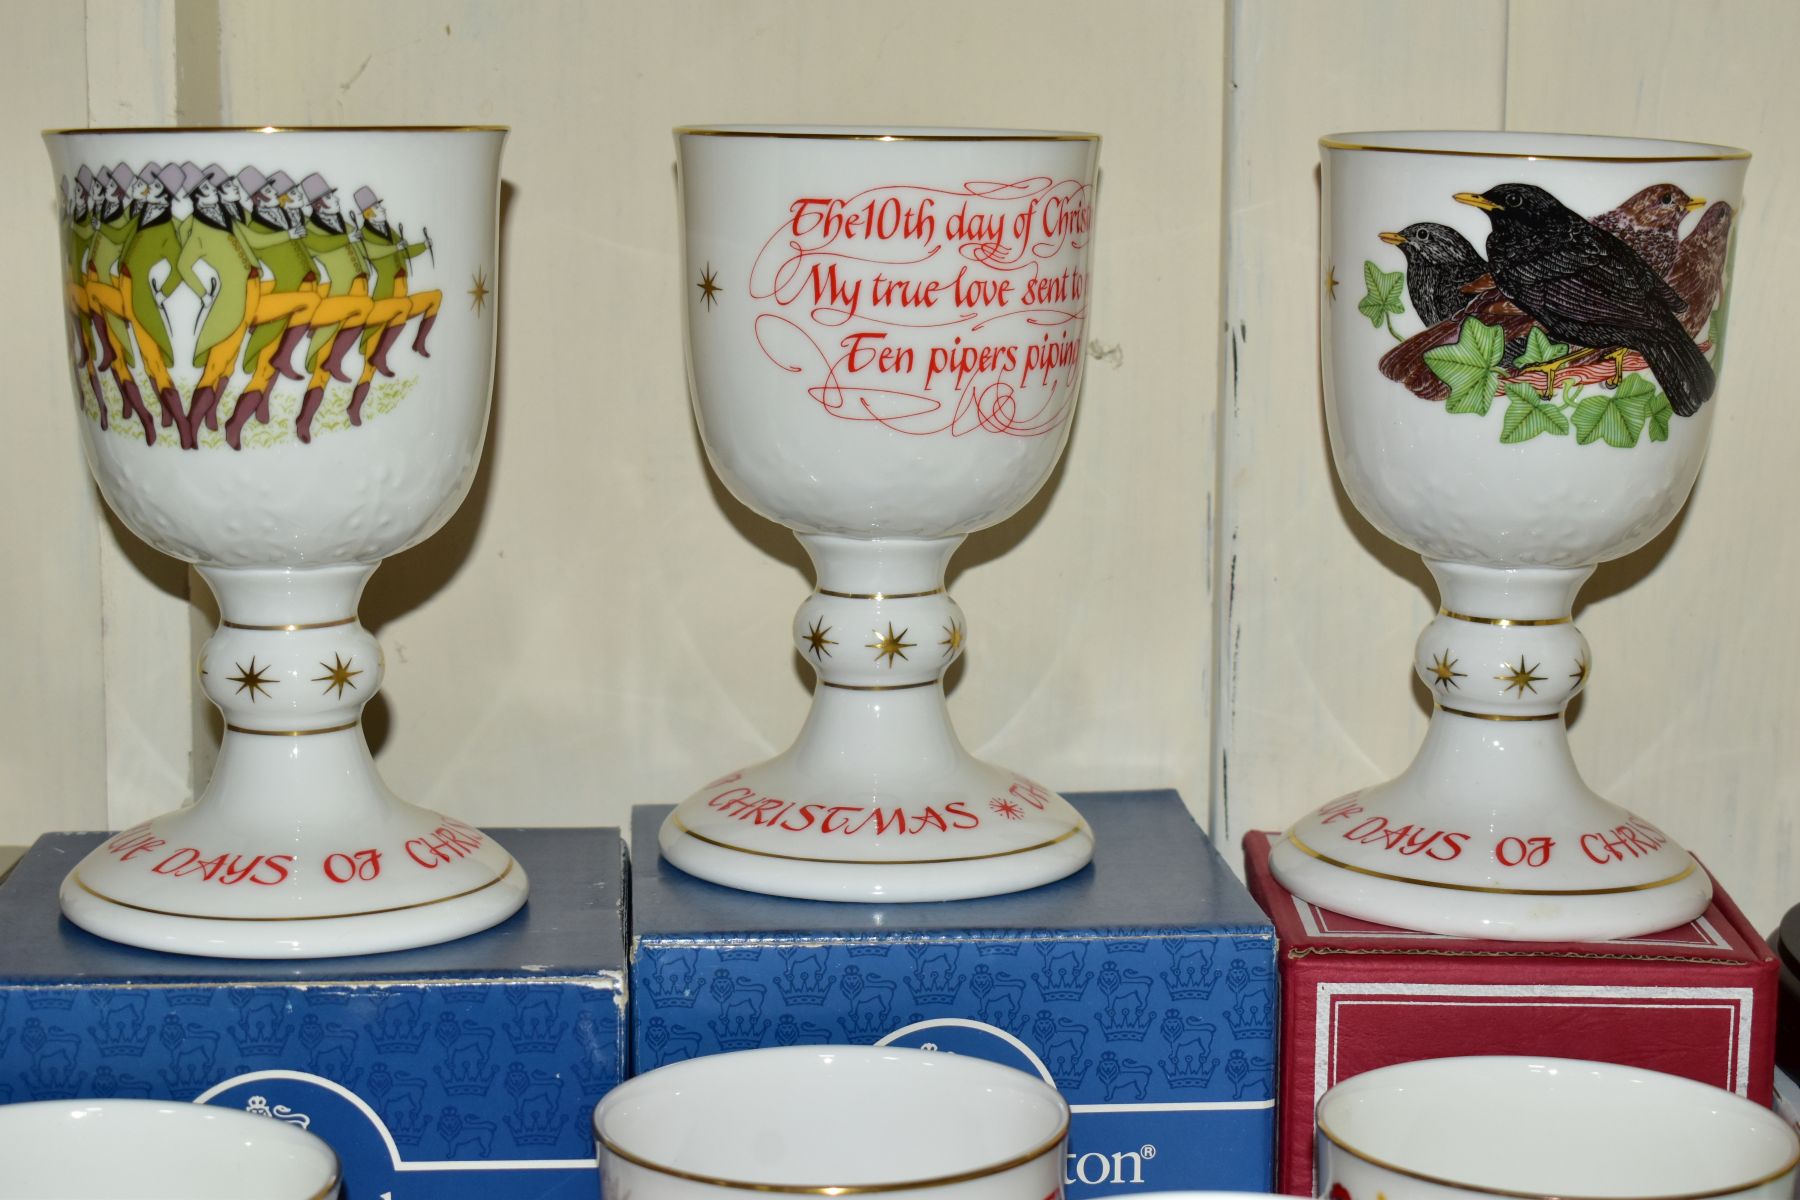 A SET OF TWELVE LIMITED EDITION ROYAL DOULTON GOBLETS, The Twelve Days of Christmas, limited to 10, - Image 3 of 6